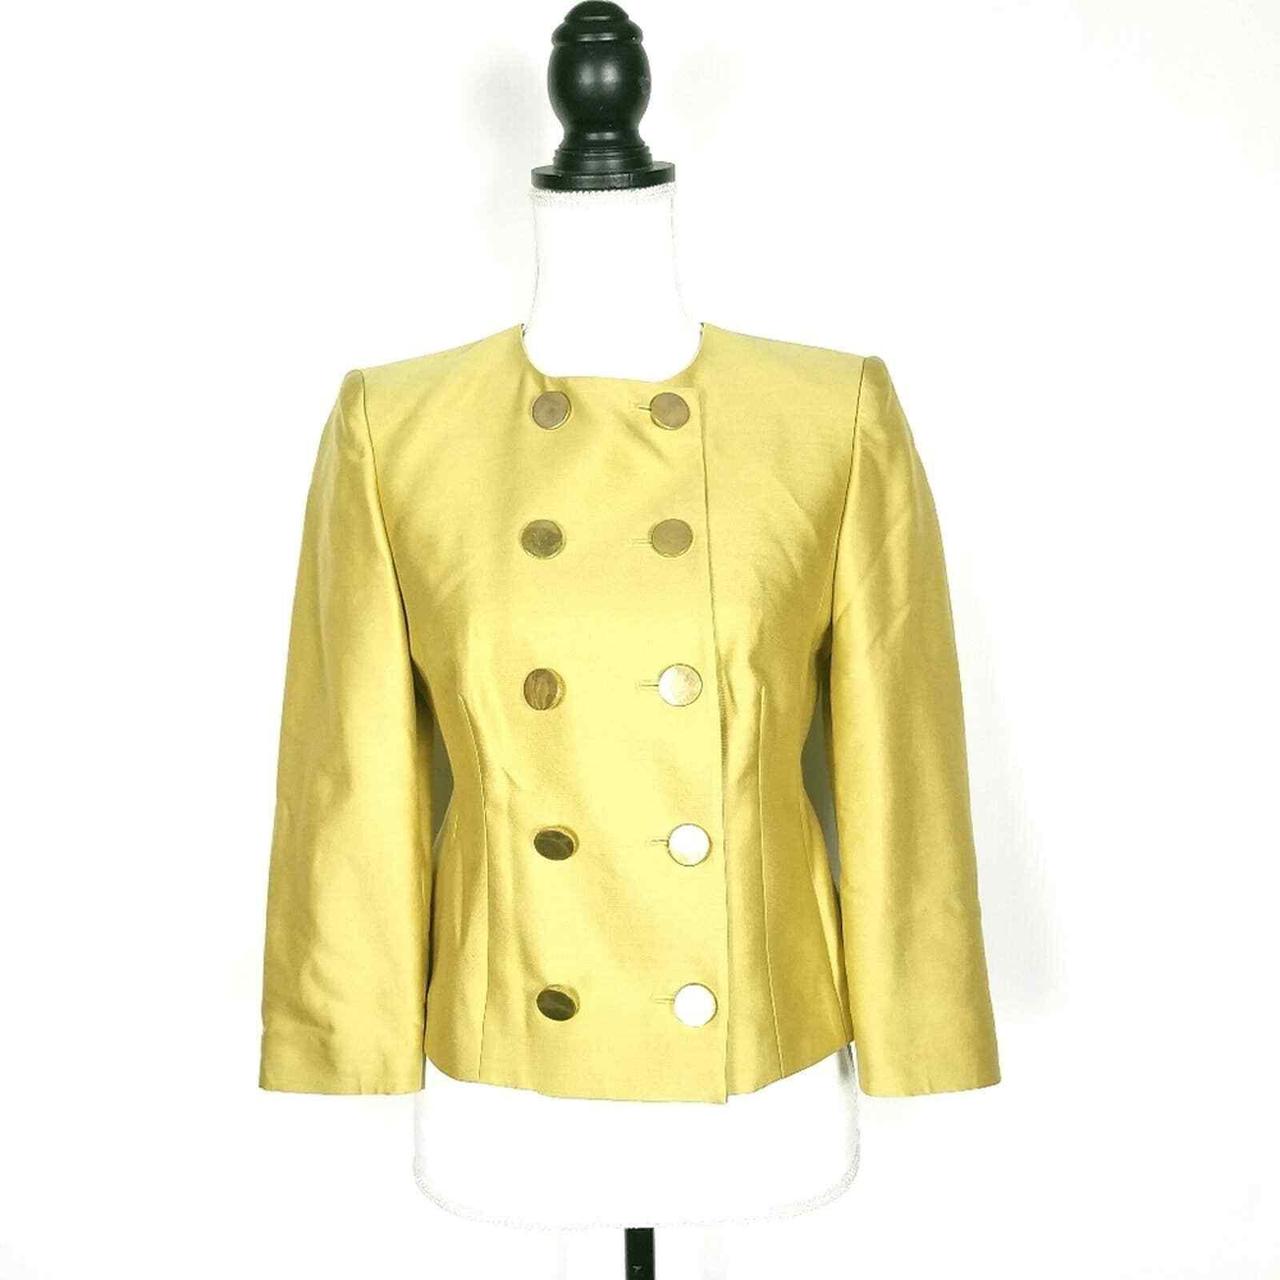 Reiss Women's Gold and Yellow